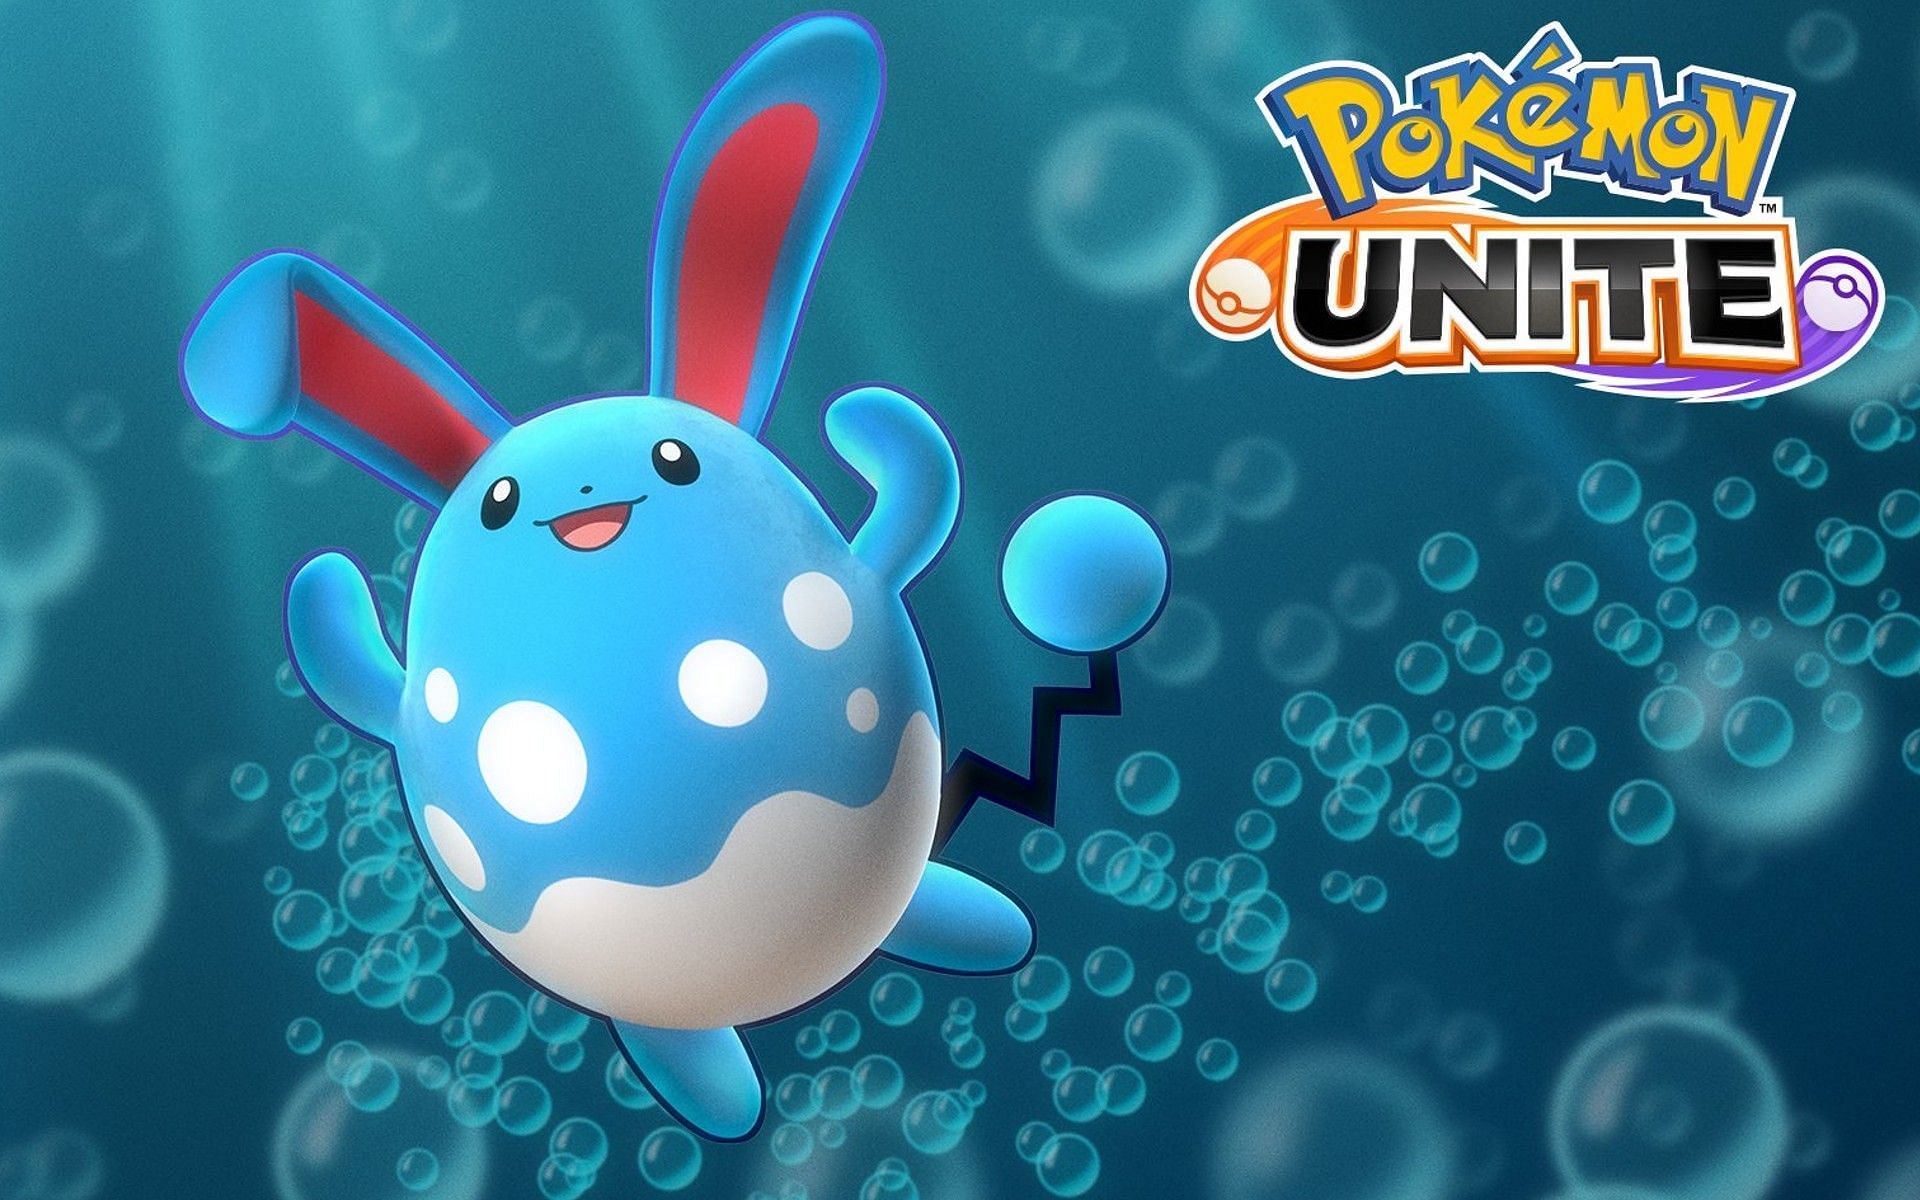 Azumarill joins the battle right before the event. (Image via Nintendo)